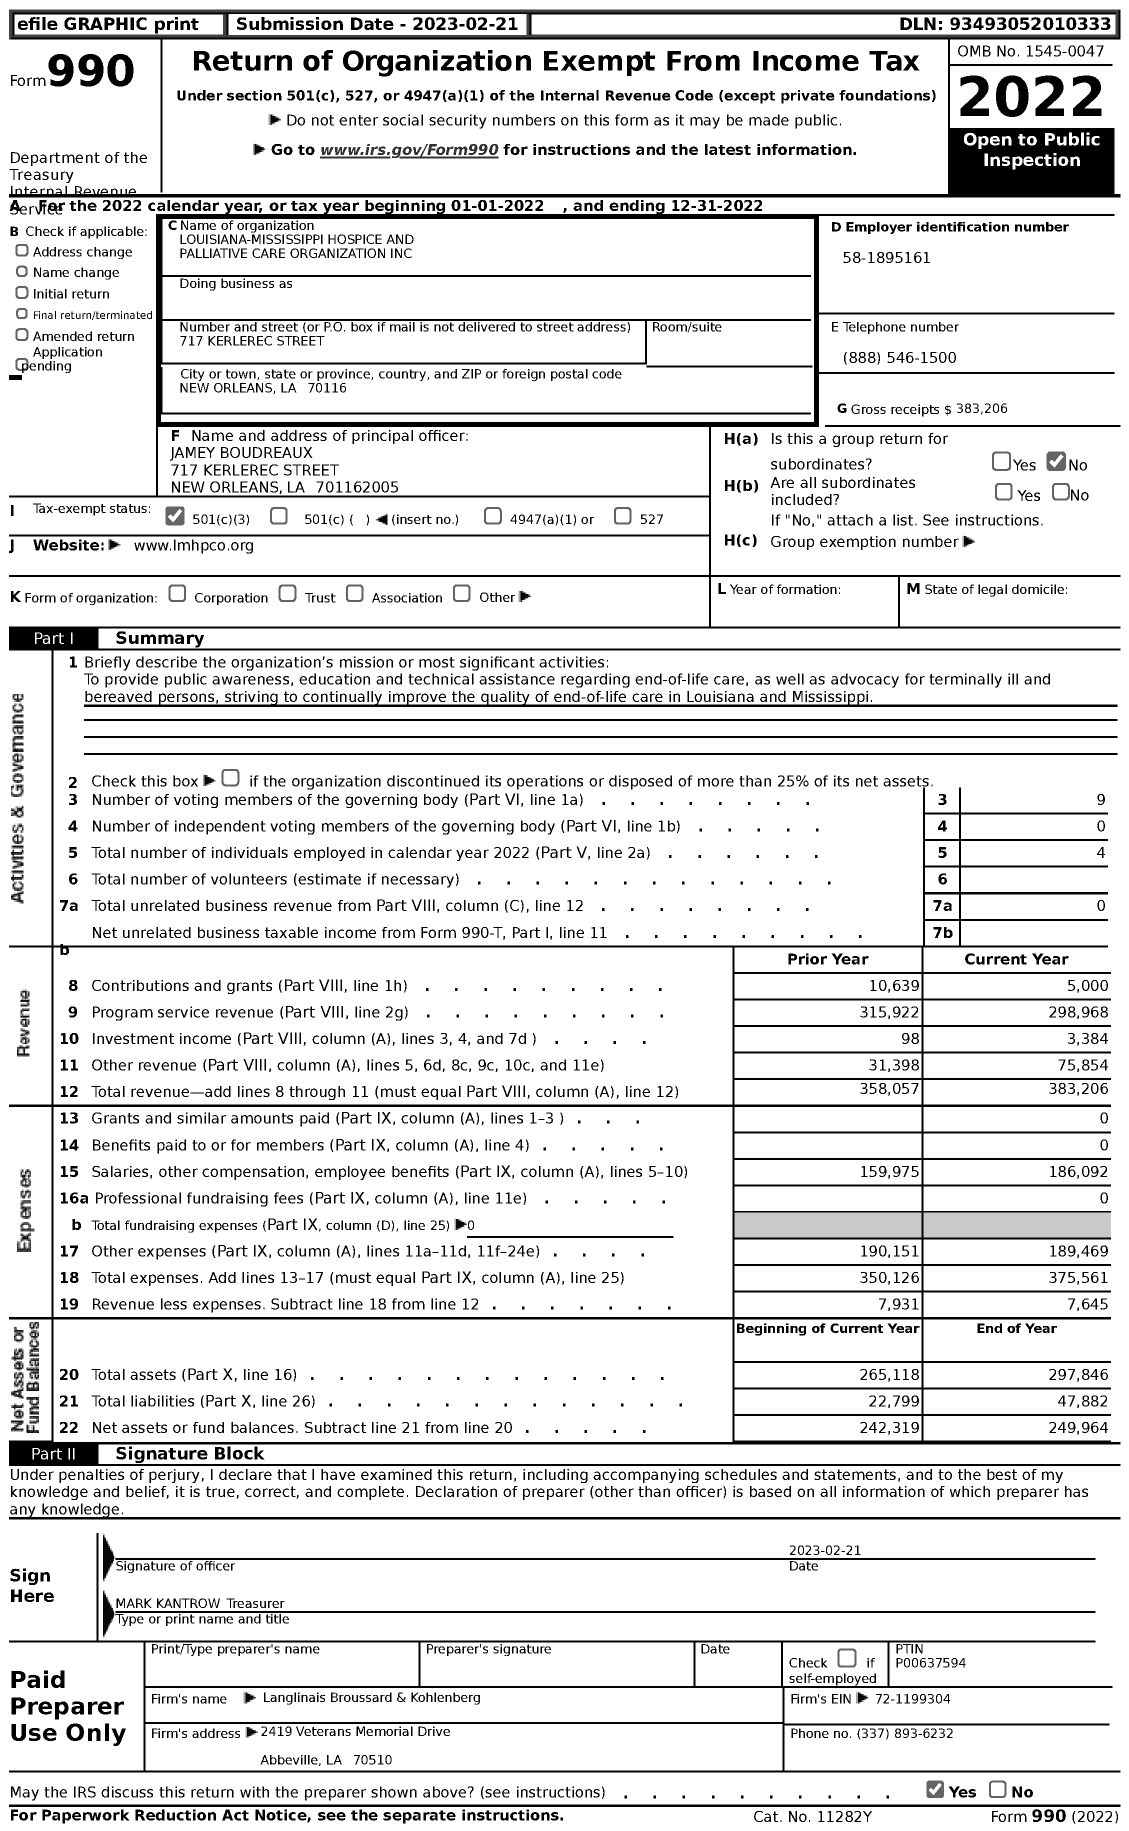 Image of first page of 2022 Form 990 for Louisiana-Mississippi Hospice and Palliative Care Organization